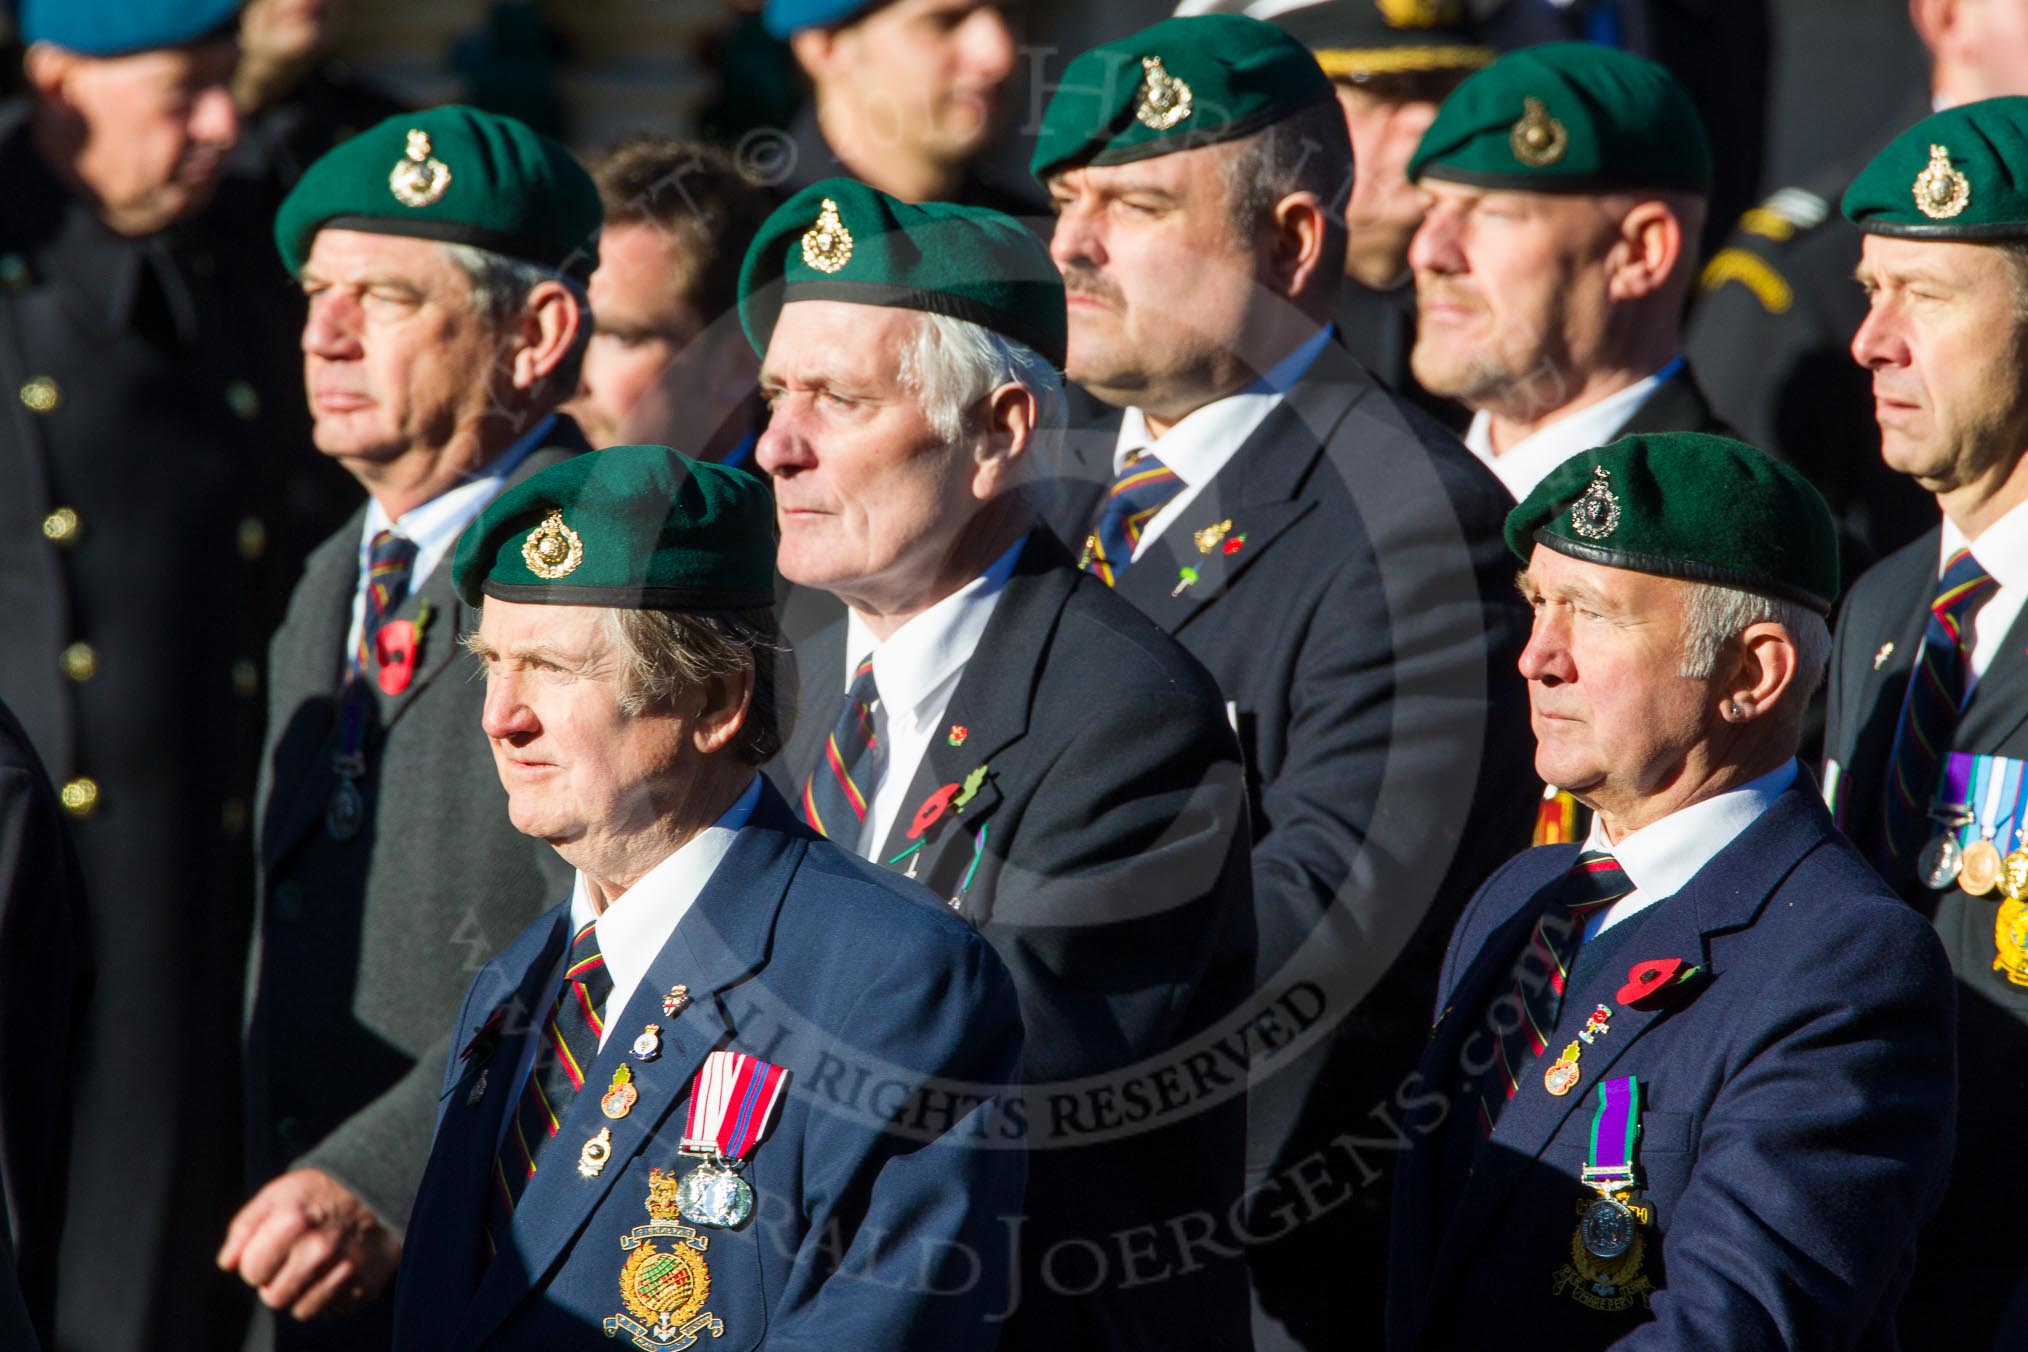 Remembrance Sunday Cenotaph March Past 2013: E3 - Royal Marines Association..
Press stand opposite the Foreign Office building, Whitehall, London SW1,
London,
Greater London,
United Kingdom,
on 10 November 2013 at 11:44, image #385